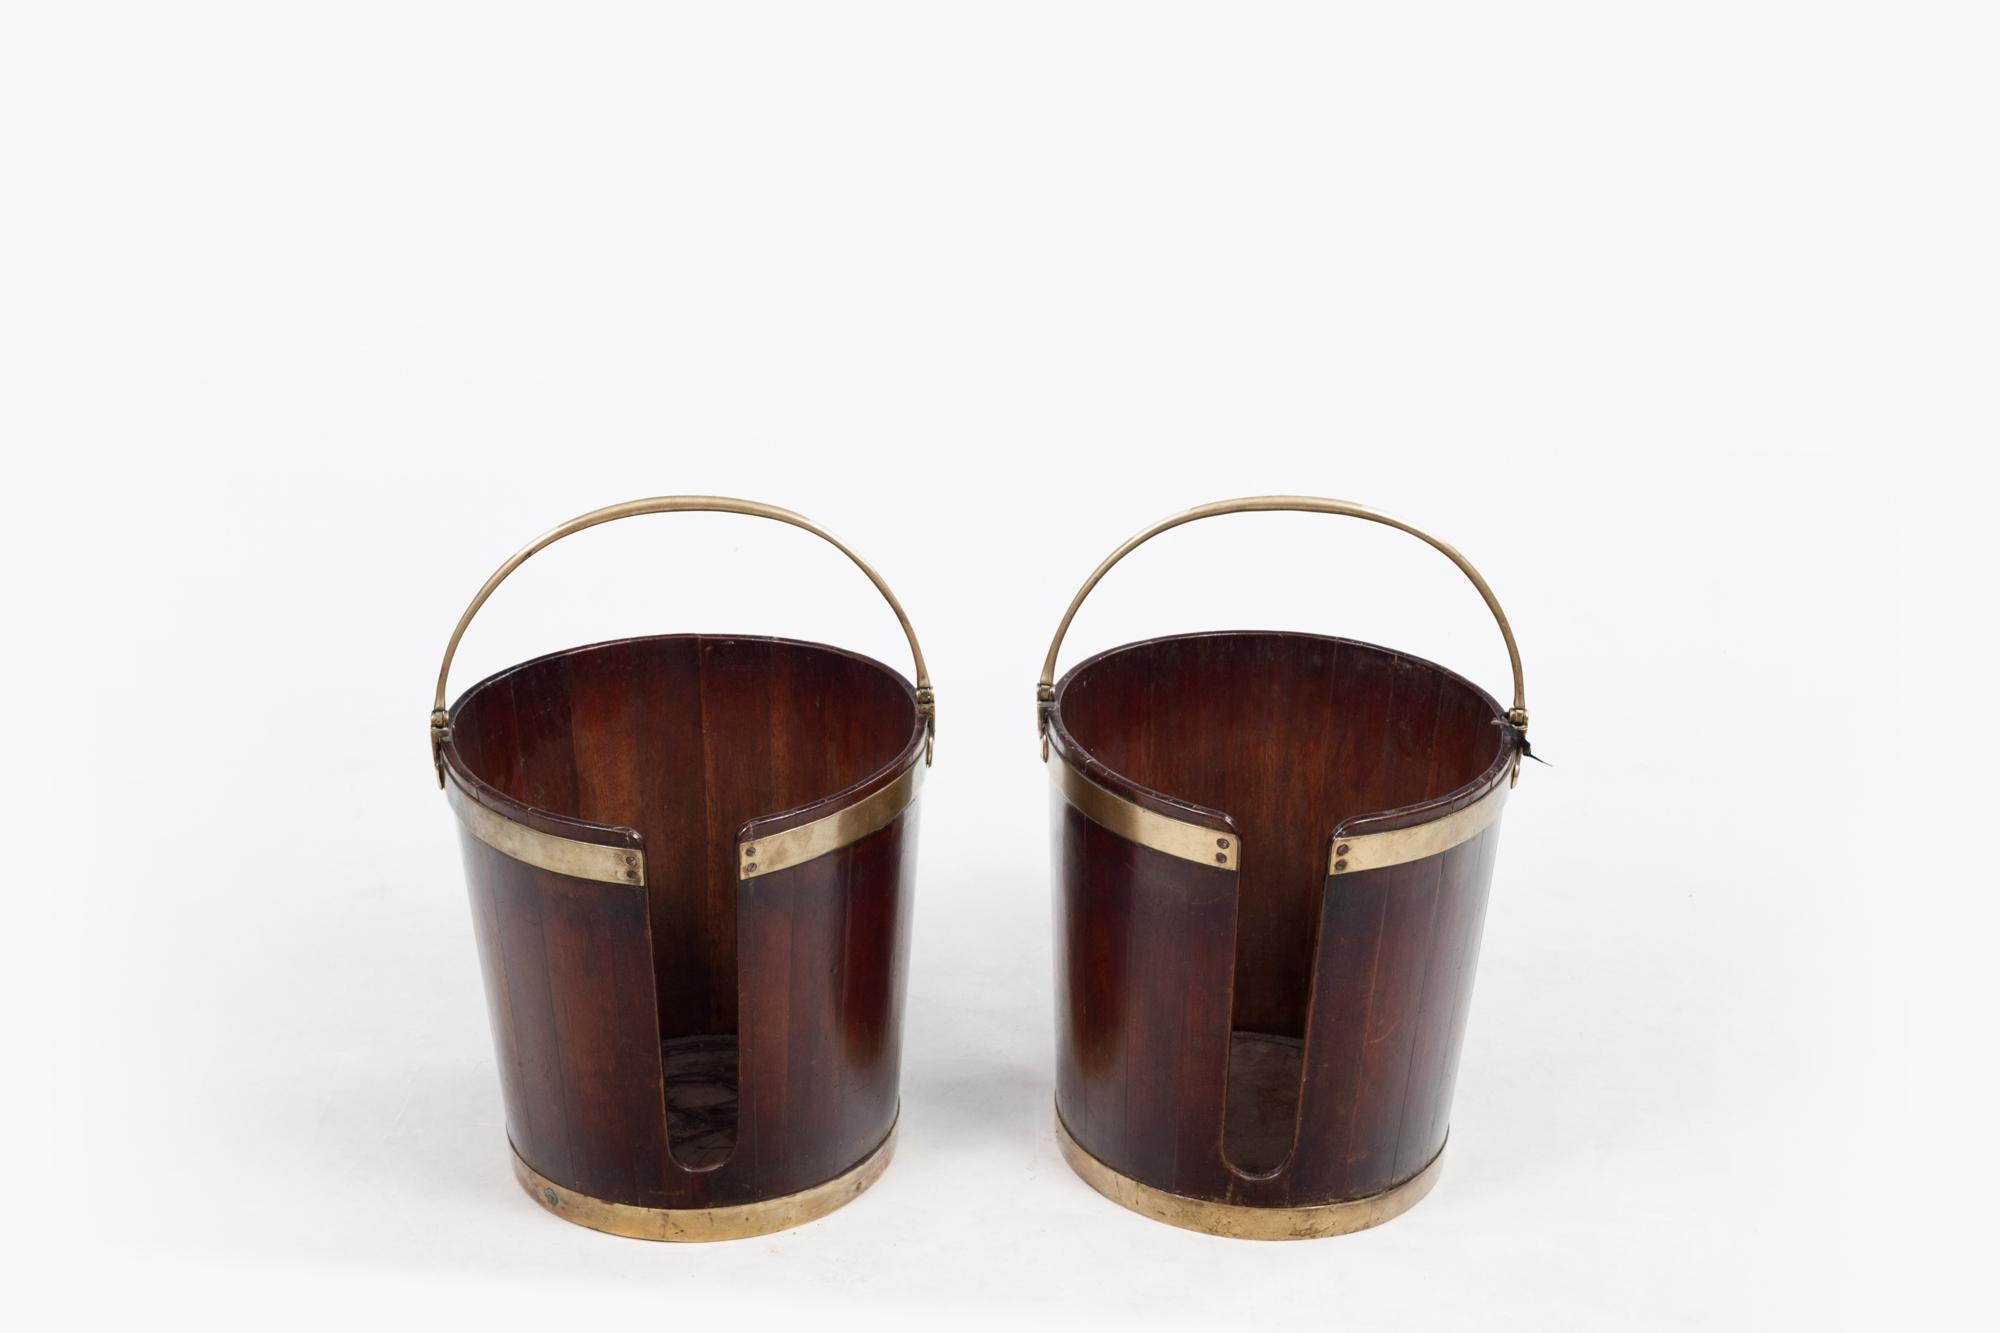 18th Century pair George III mahogany and brass bound plate buckets of coopered construction, with two brass bands and brass swing handle. Circa 1770.